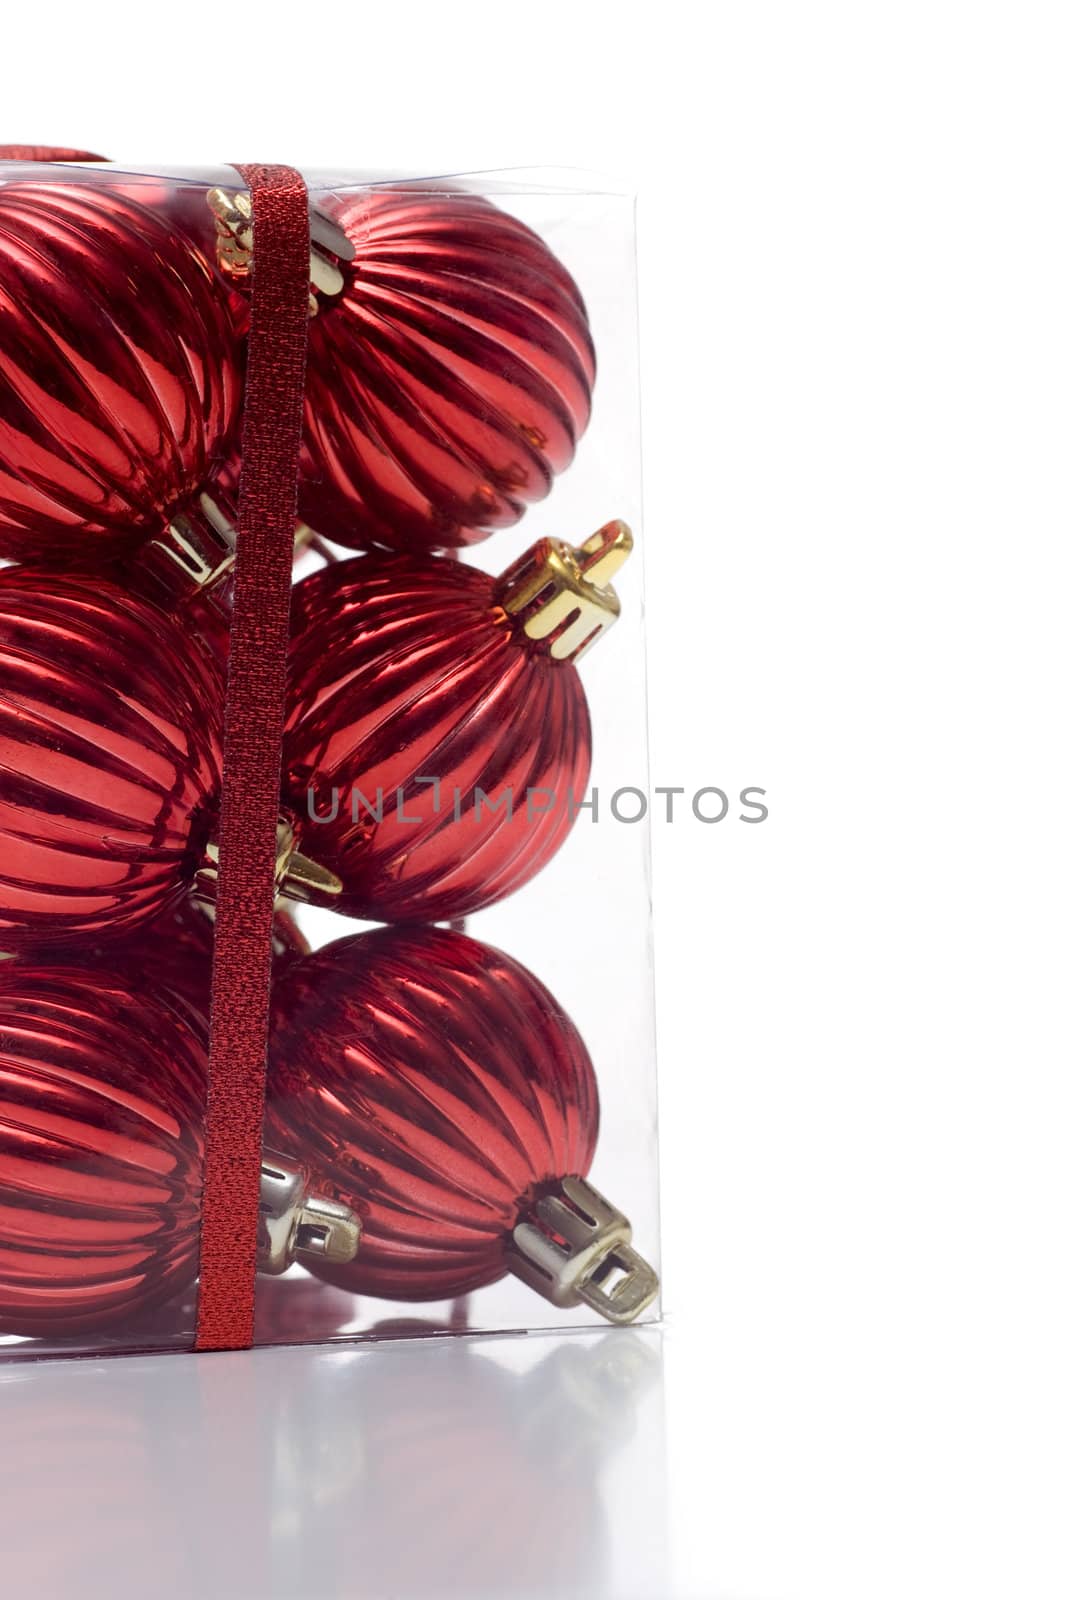 A package of christmas ornaments, packaged in a clear plastic box, wrapped in ribbon, and isolated on white.